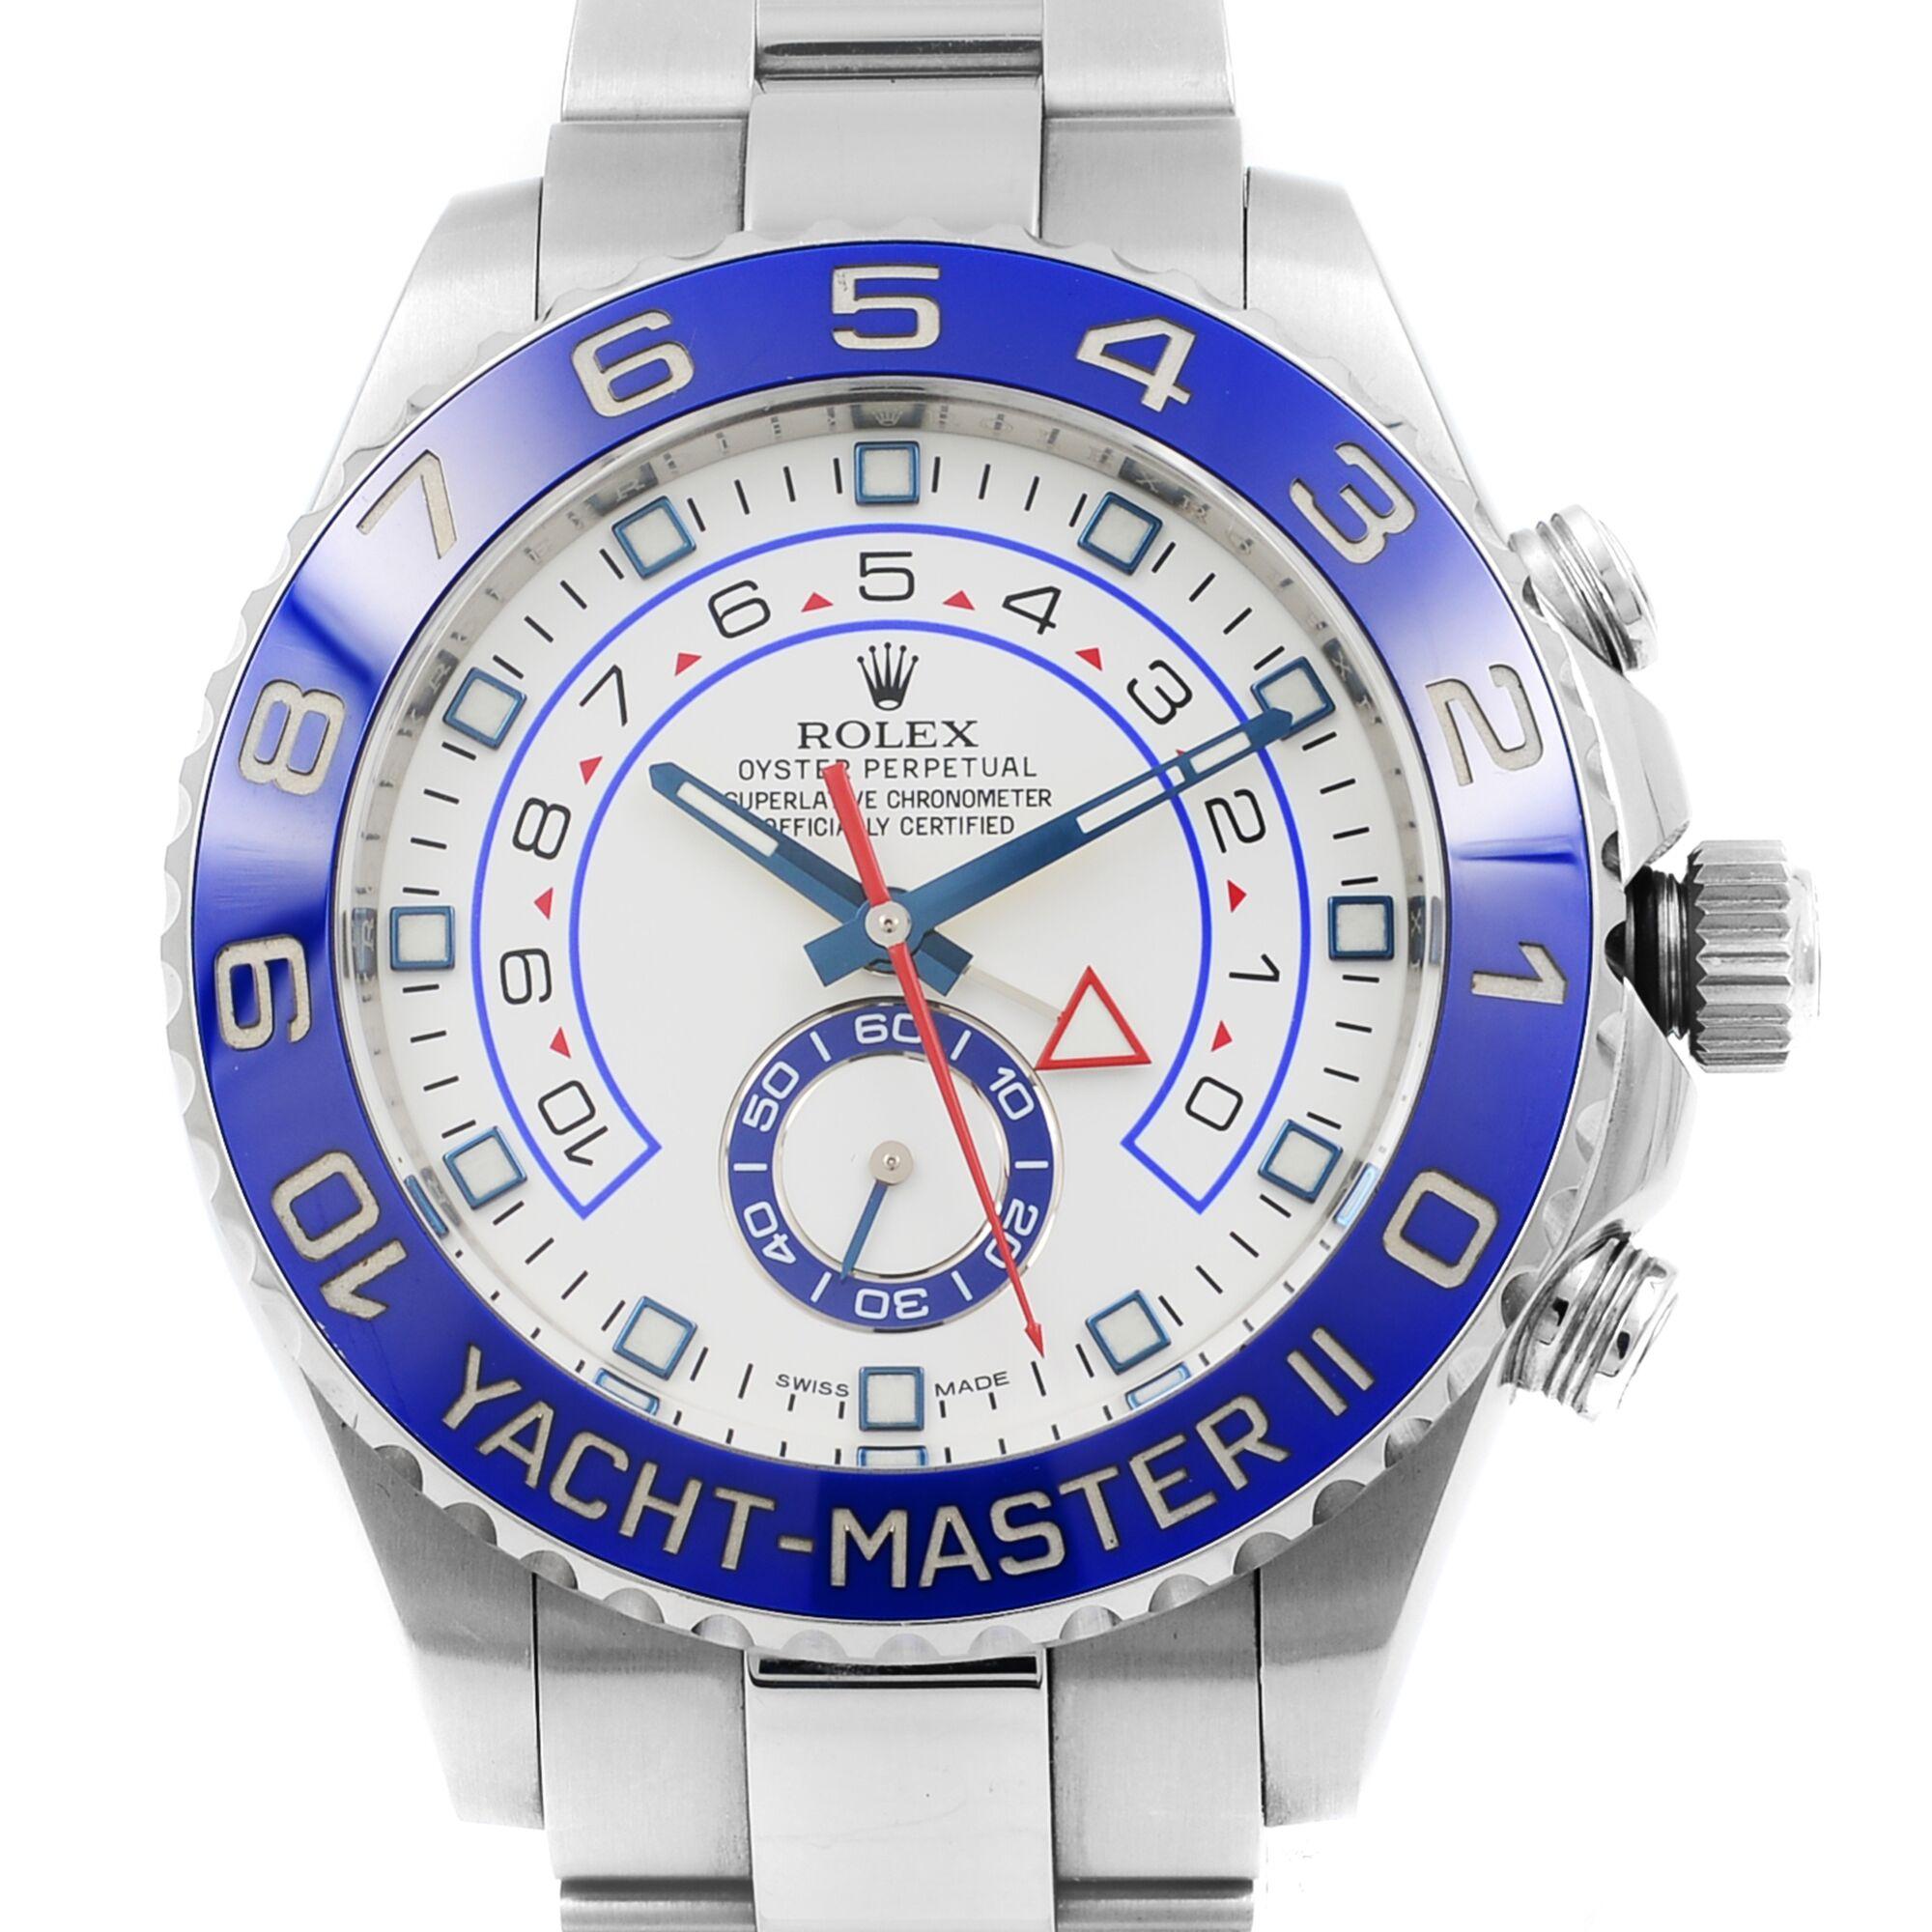 Pre-Owned Rolex Yacht-Master II Men's Watch 116680. Full Links.  Card 2014. Original Box and Papers are included. Covered by a one-year Chronostore warranty. 
Details:
Brand Rolex
Department Men
Model Number 116680-0002
Country/Region of Manufacture